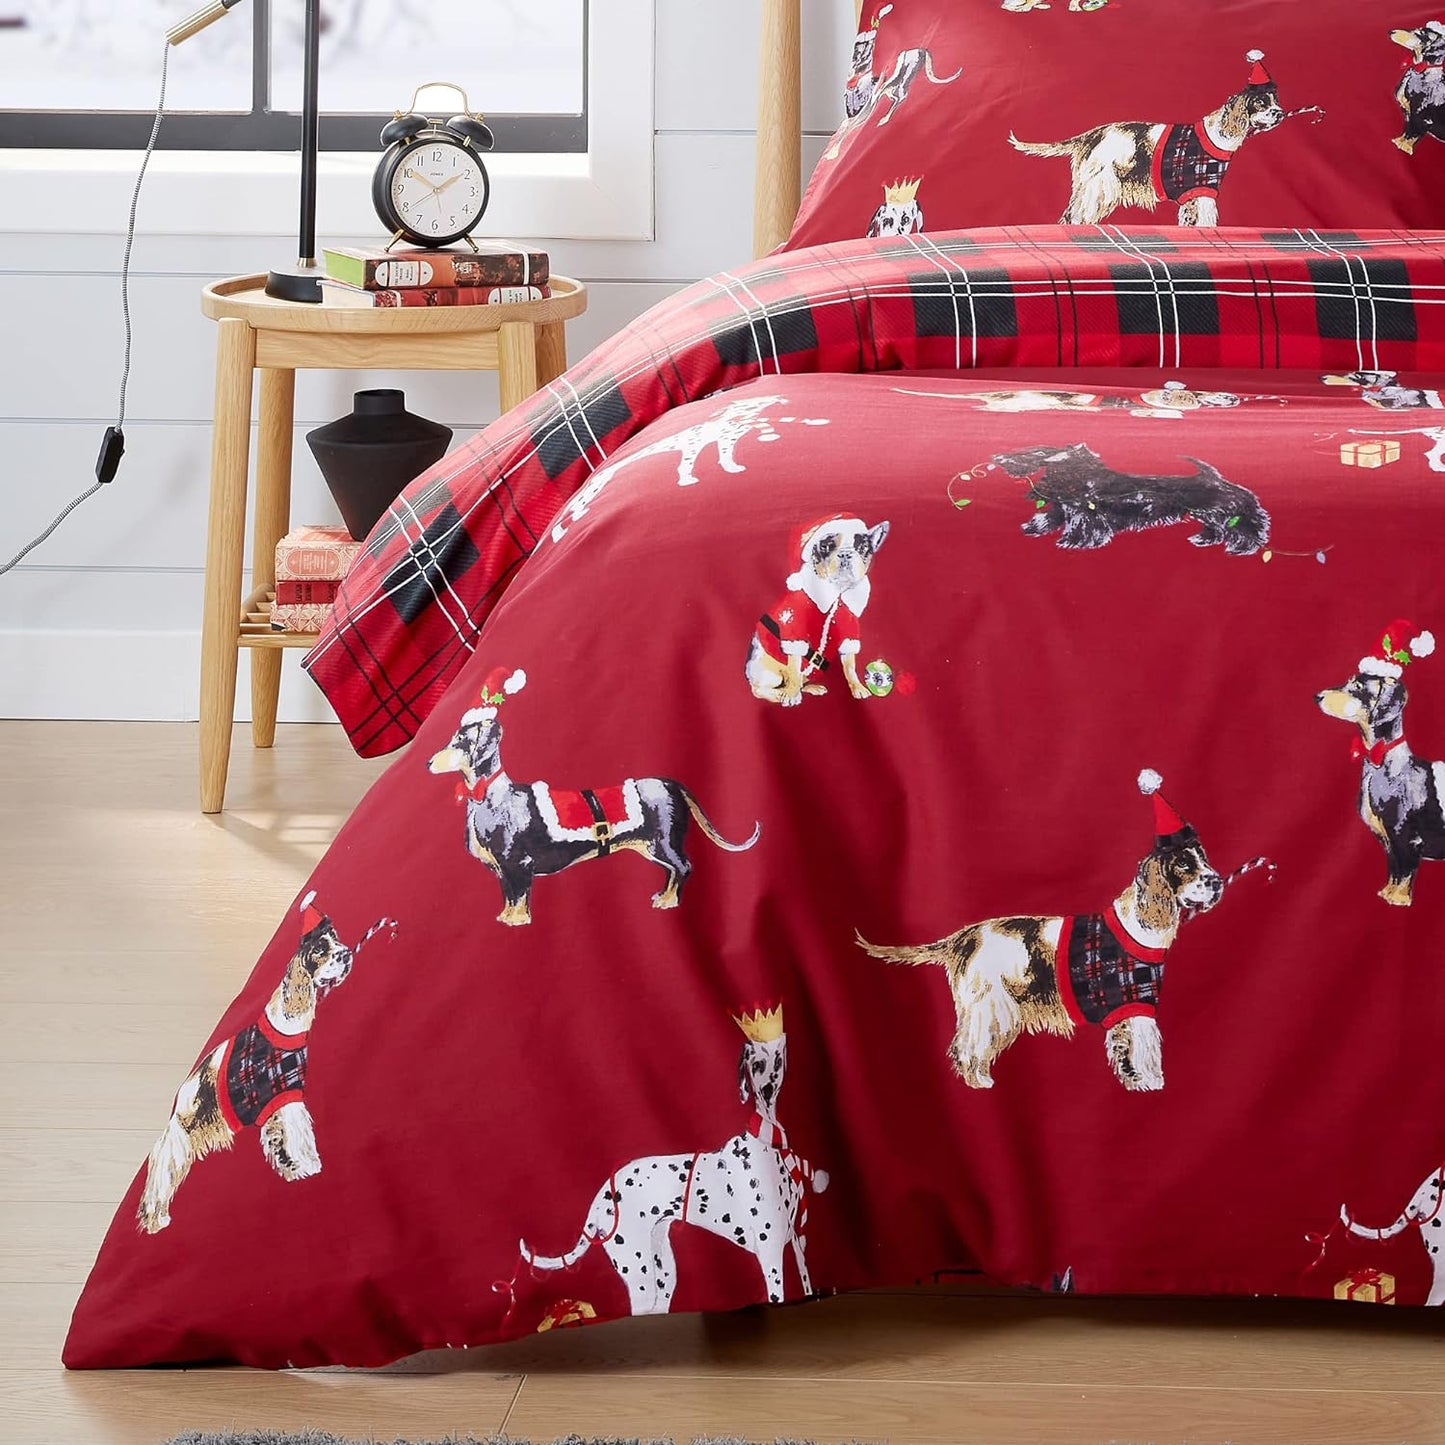 Christmas Dogs Duvet Cover Set Puppies White Grey Reversible Super Soft Easy Care Cute Animal Print Quilt Bedding Bed Sets with Pillowcase